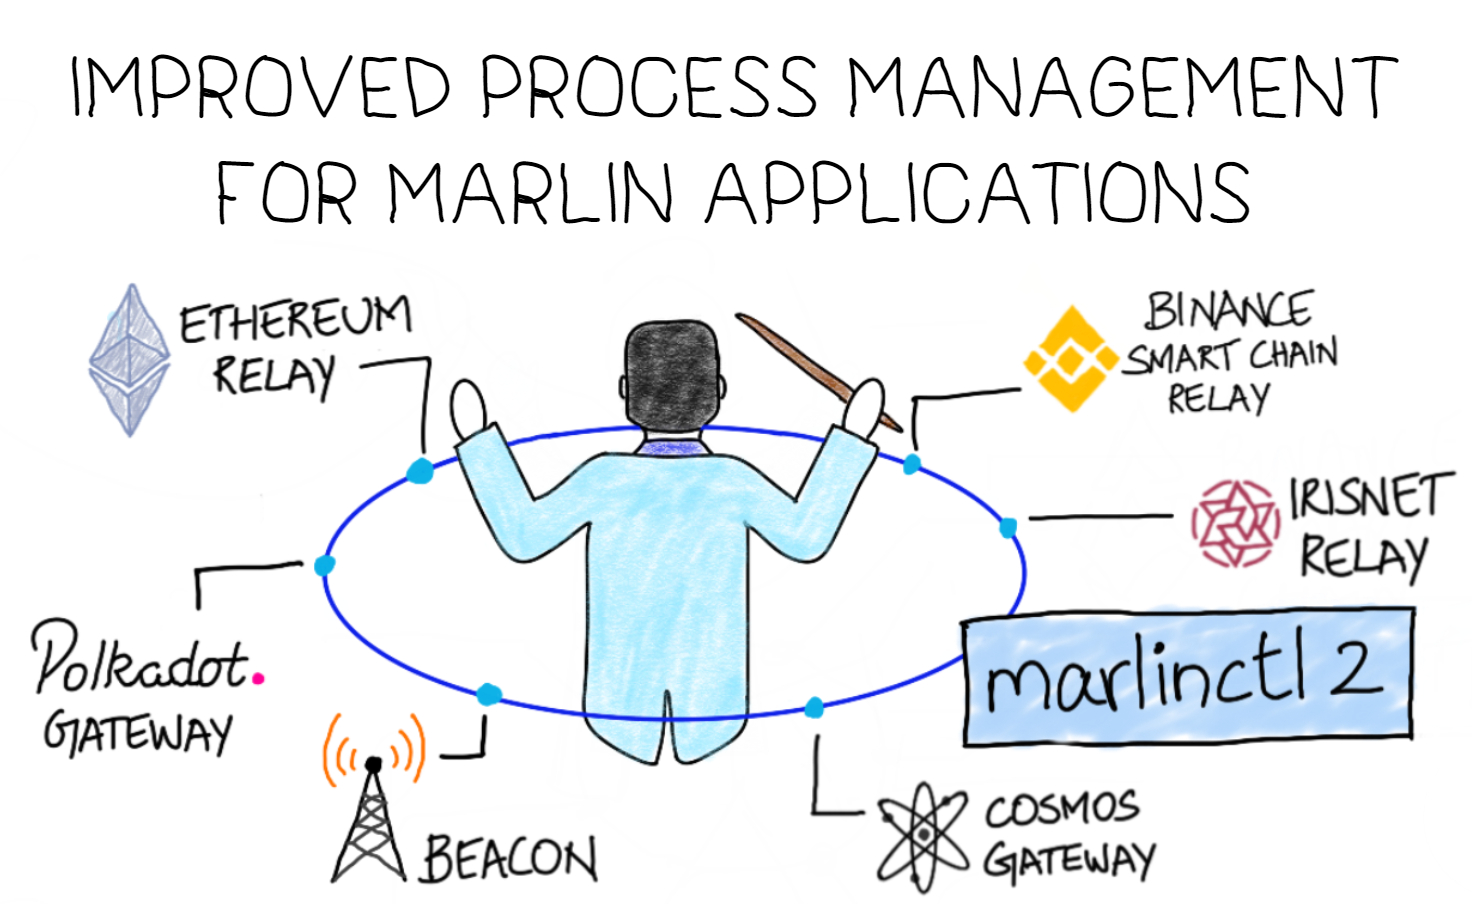 marlinctl 2 - Improved process management for marlin applications